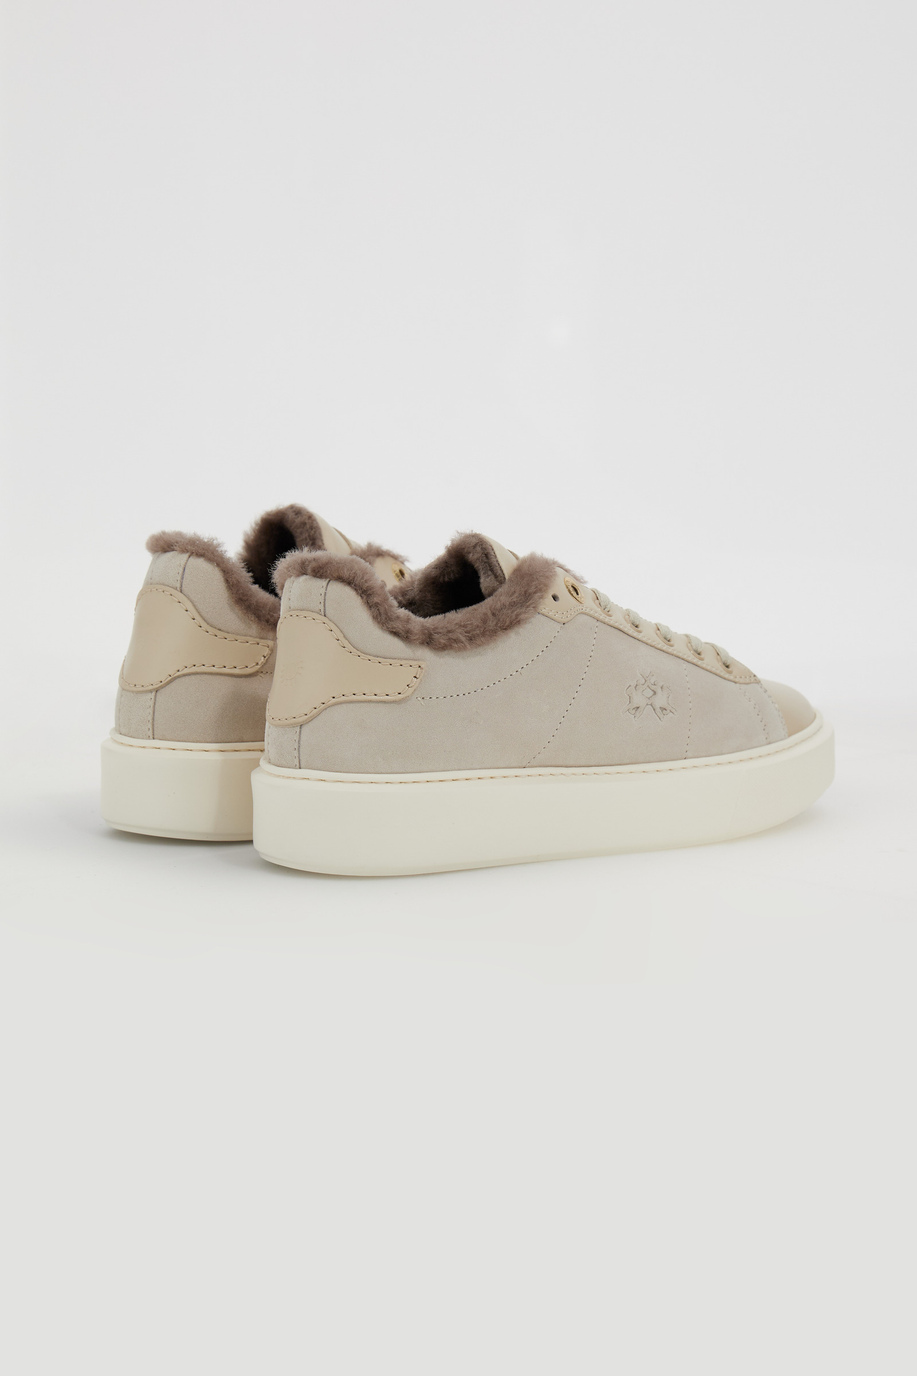 Women's trainers with inner lining - Footwear | La Martina - Official Online Shop